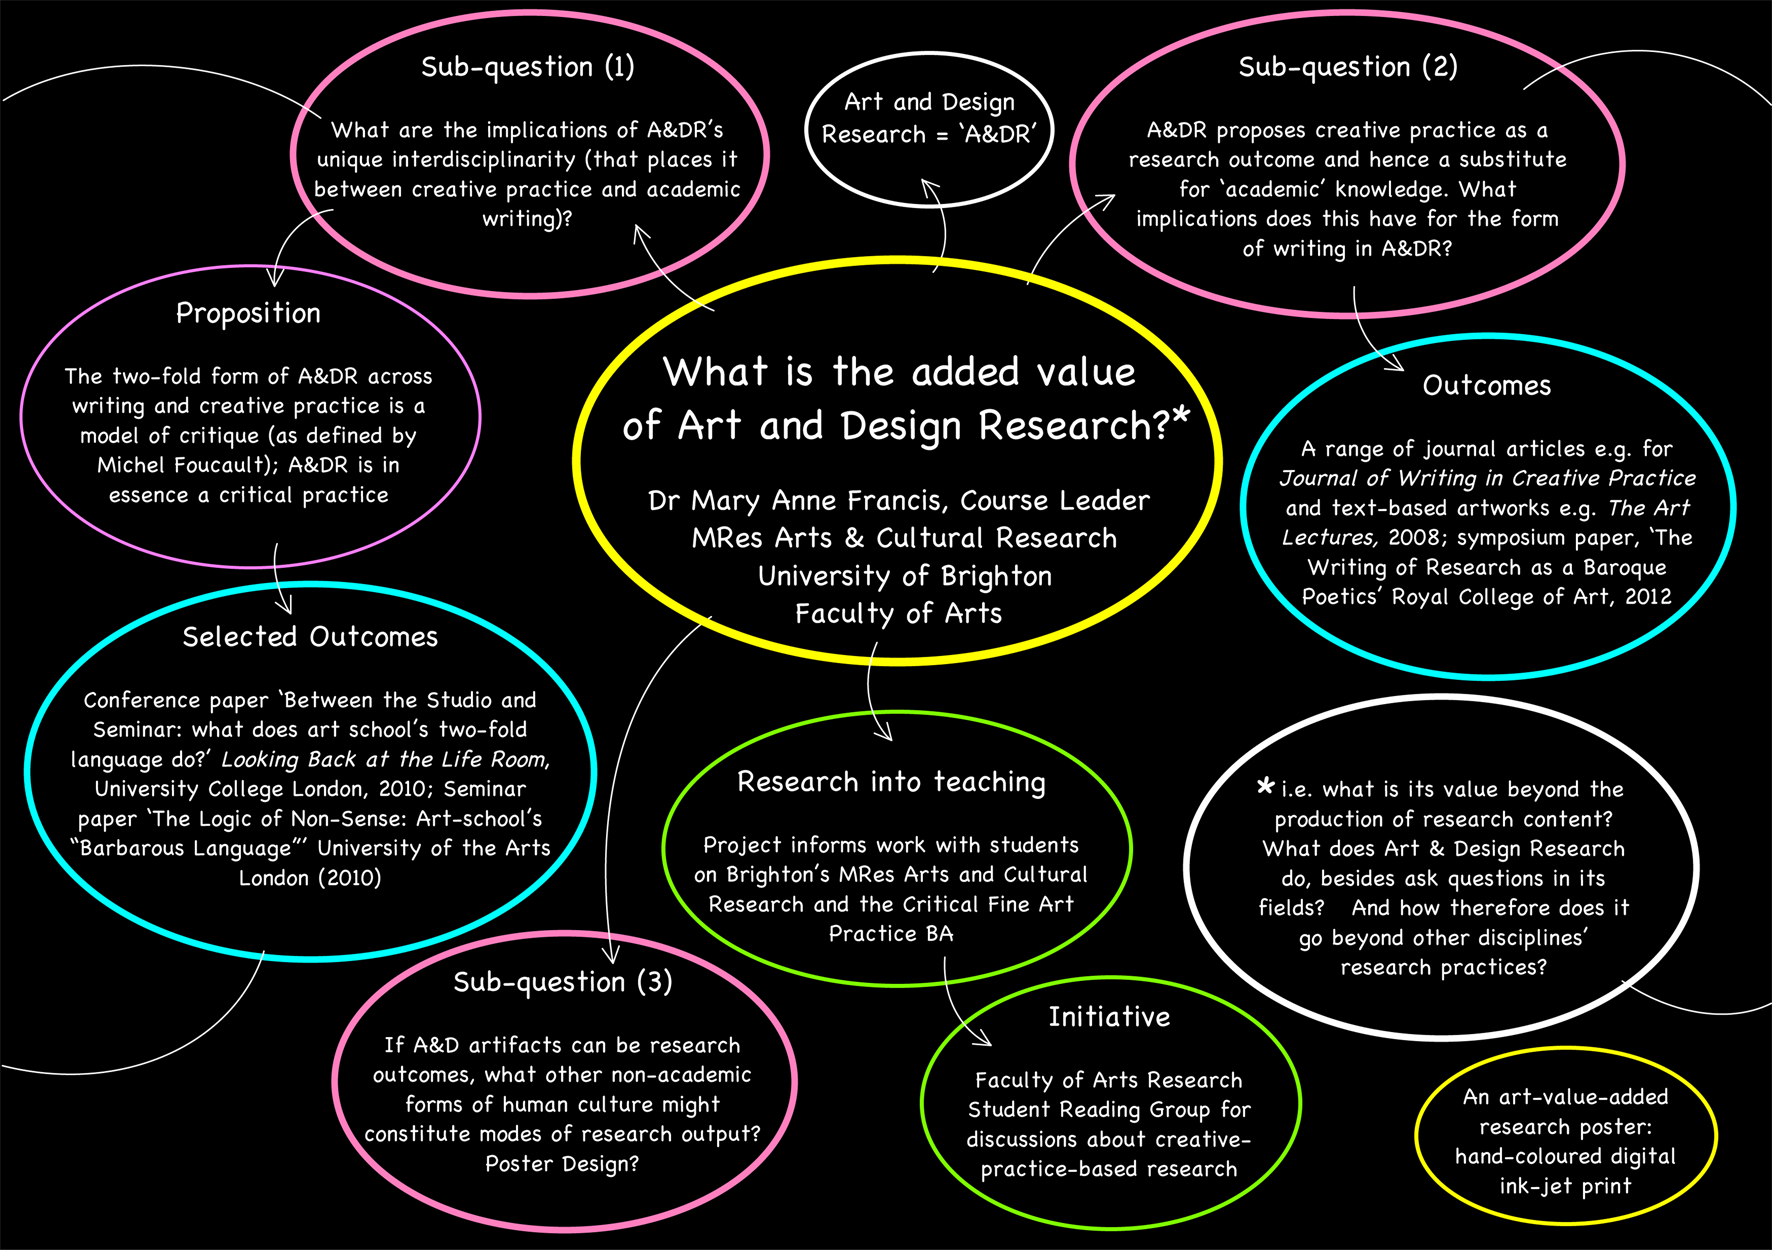 Poster on Creative Practice Research